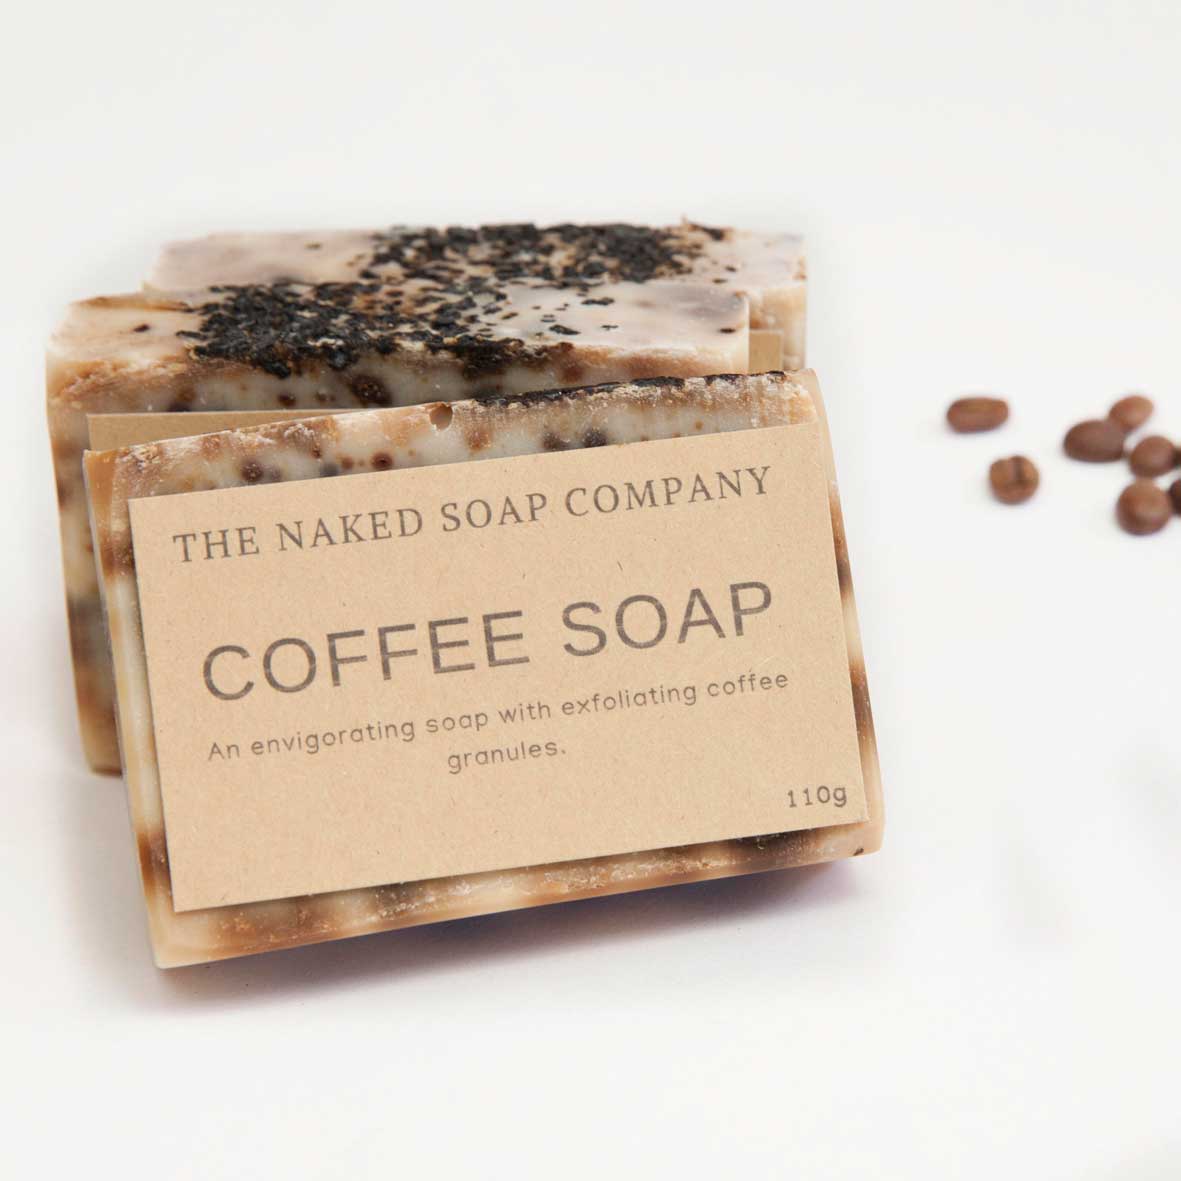 The Naked Soap Company plastic-free, vegan & non-toxic coffee soap. 3 lined up on white background with coffee beans scattered in background.